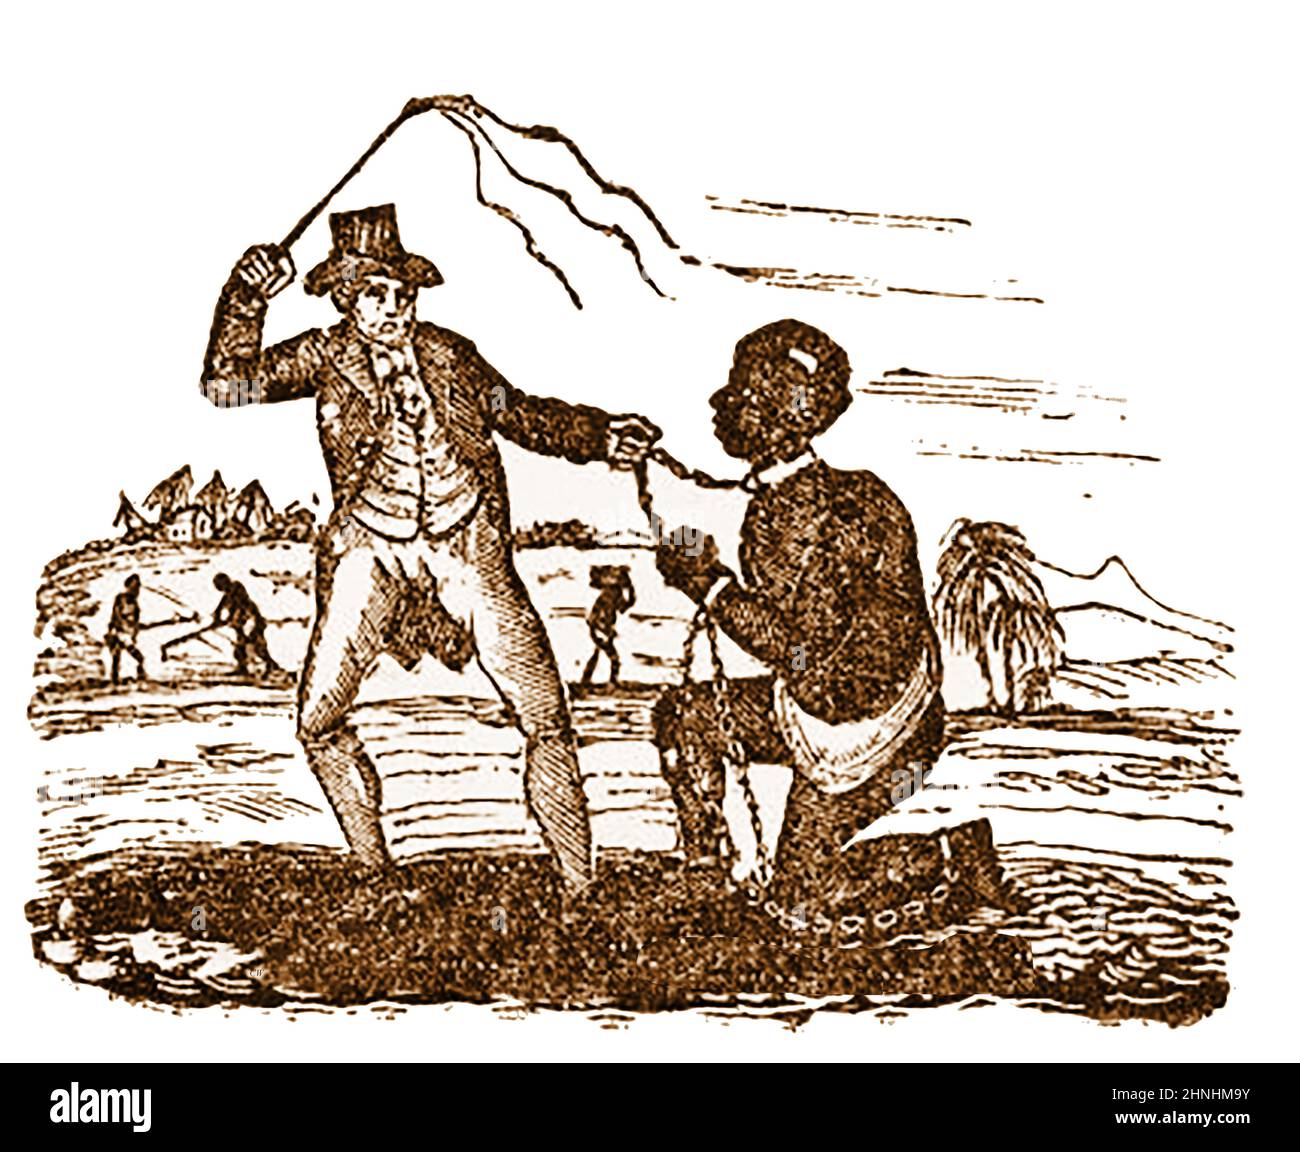 ANTI-SLAVERY MOVEMENT - An early 19th century engraving illustrating the  mistreatment of slaves on a plantation. Stock Photo